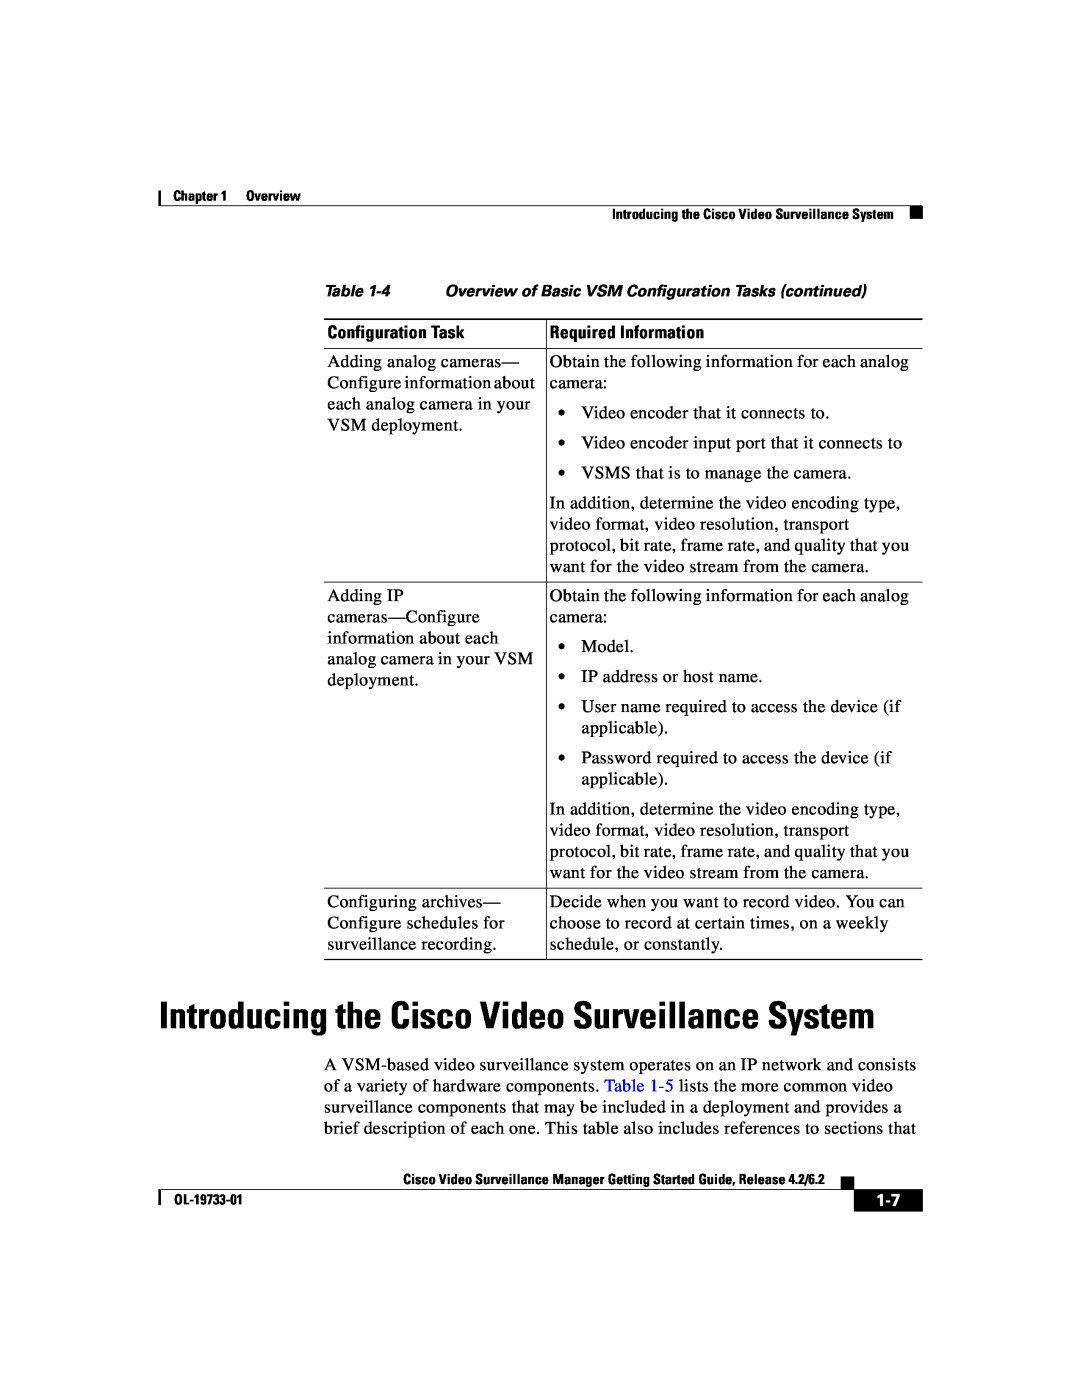 Cisco Systems Release 4.2 manual Introducing the Cisco Video Surveillance System, Configuration Task, Required Information 